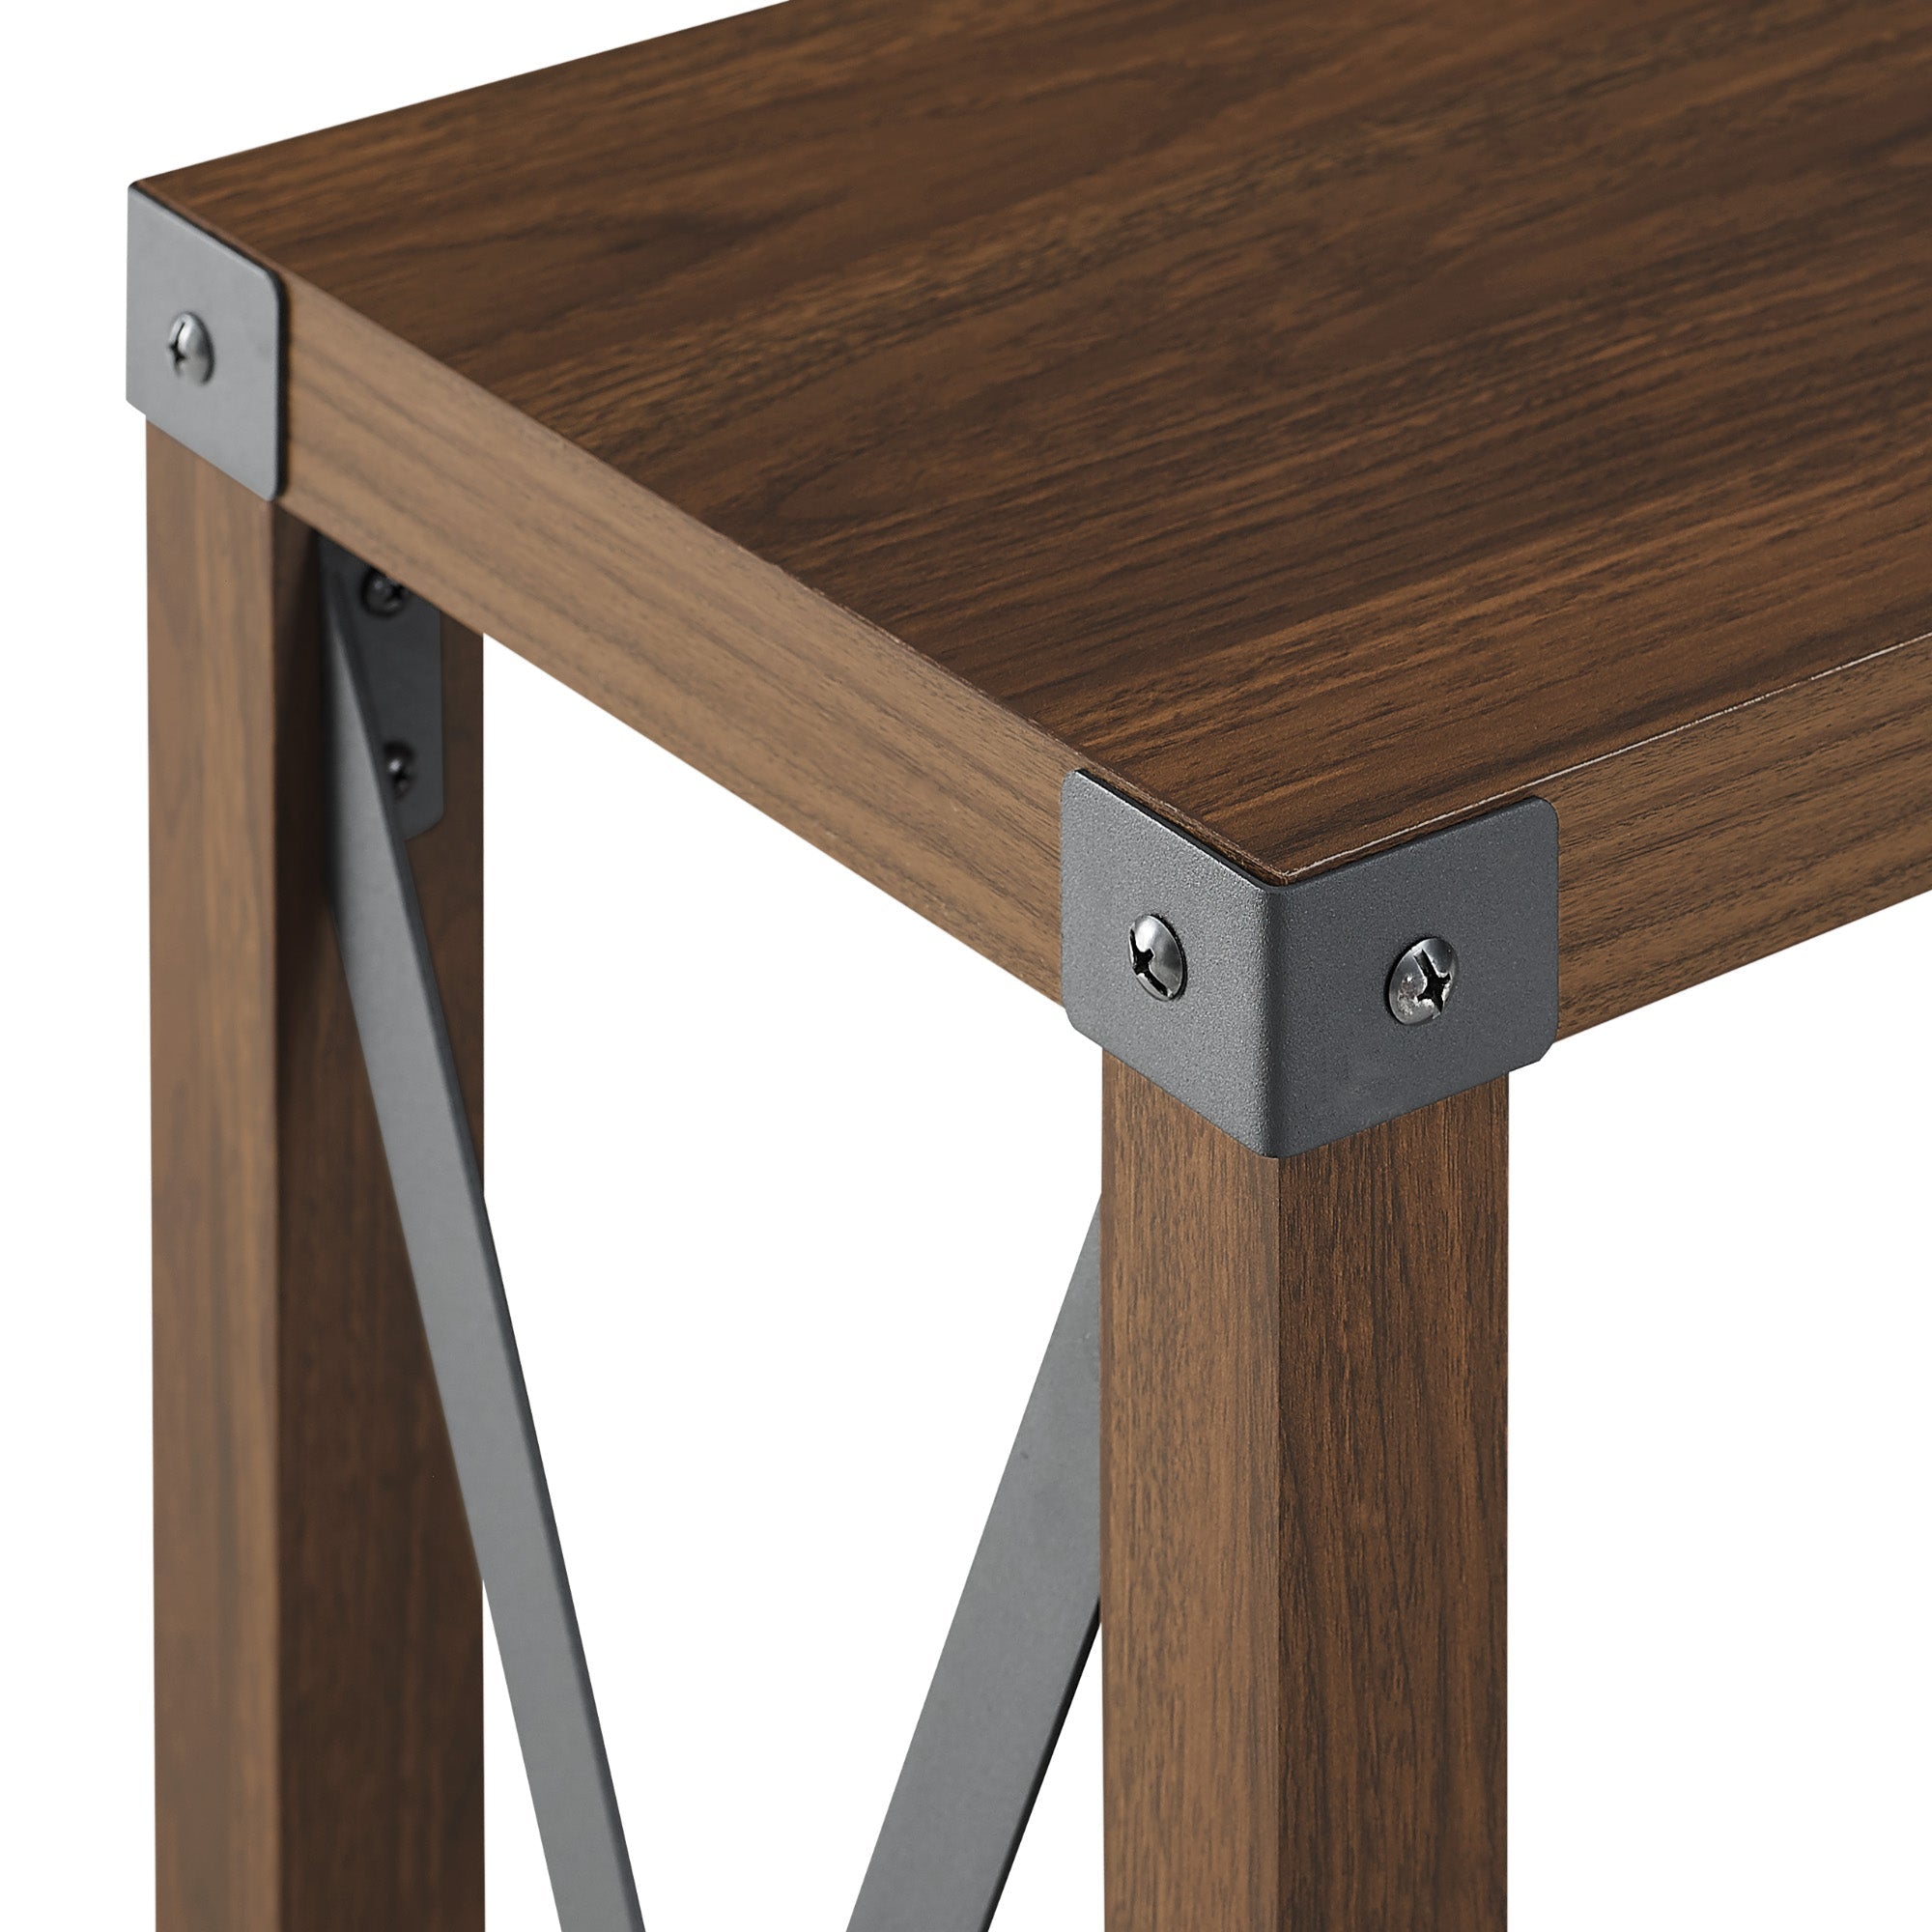 Nebularix Metal-X Entry Table with Lower Shelf - Consoles